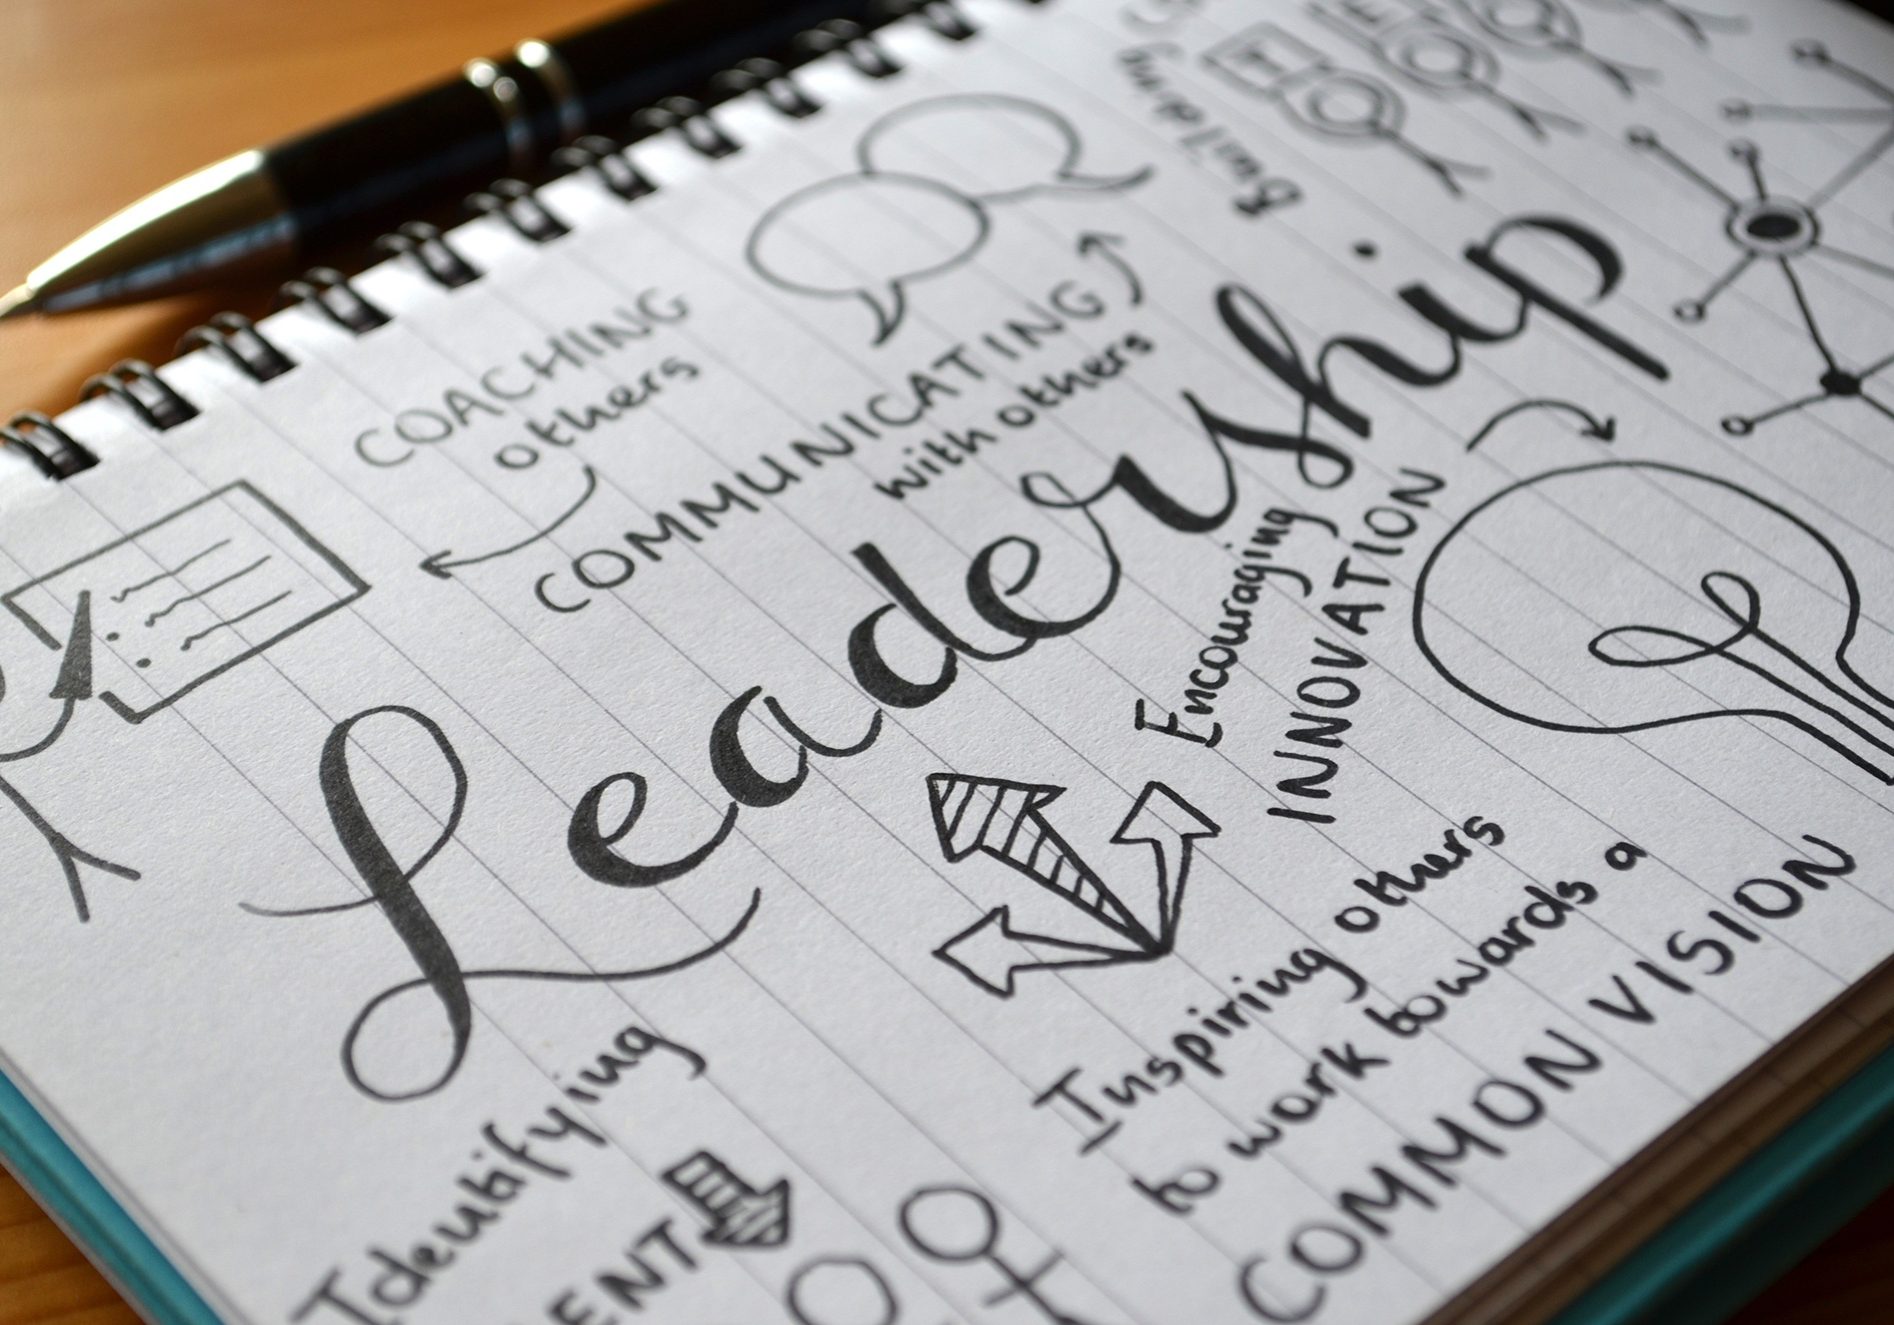 LEADERSHIP graphic notes on notepad